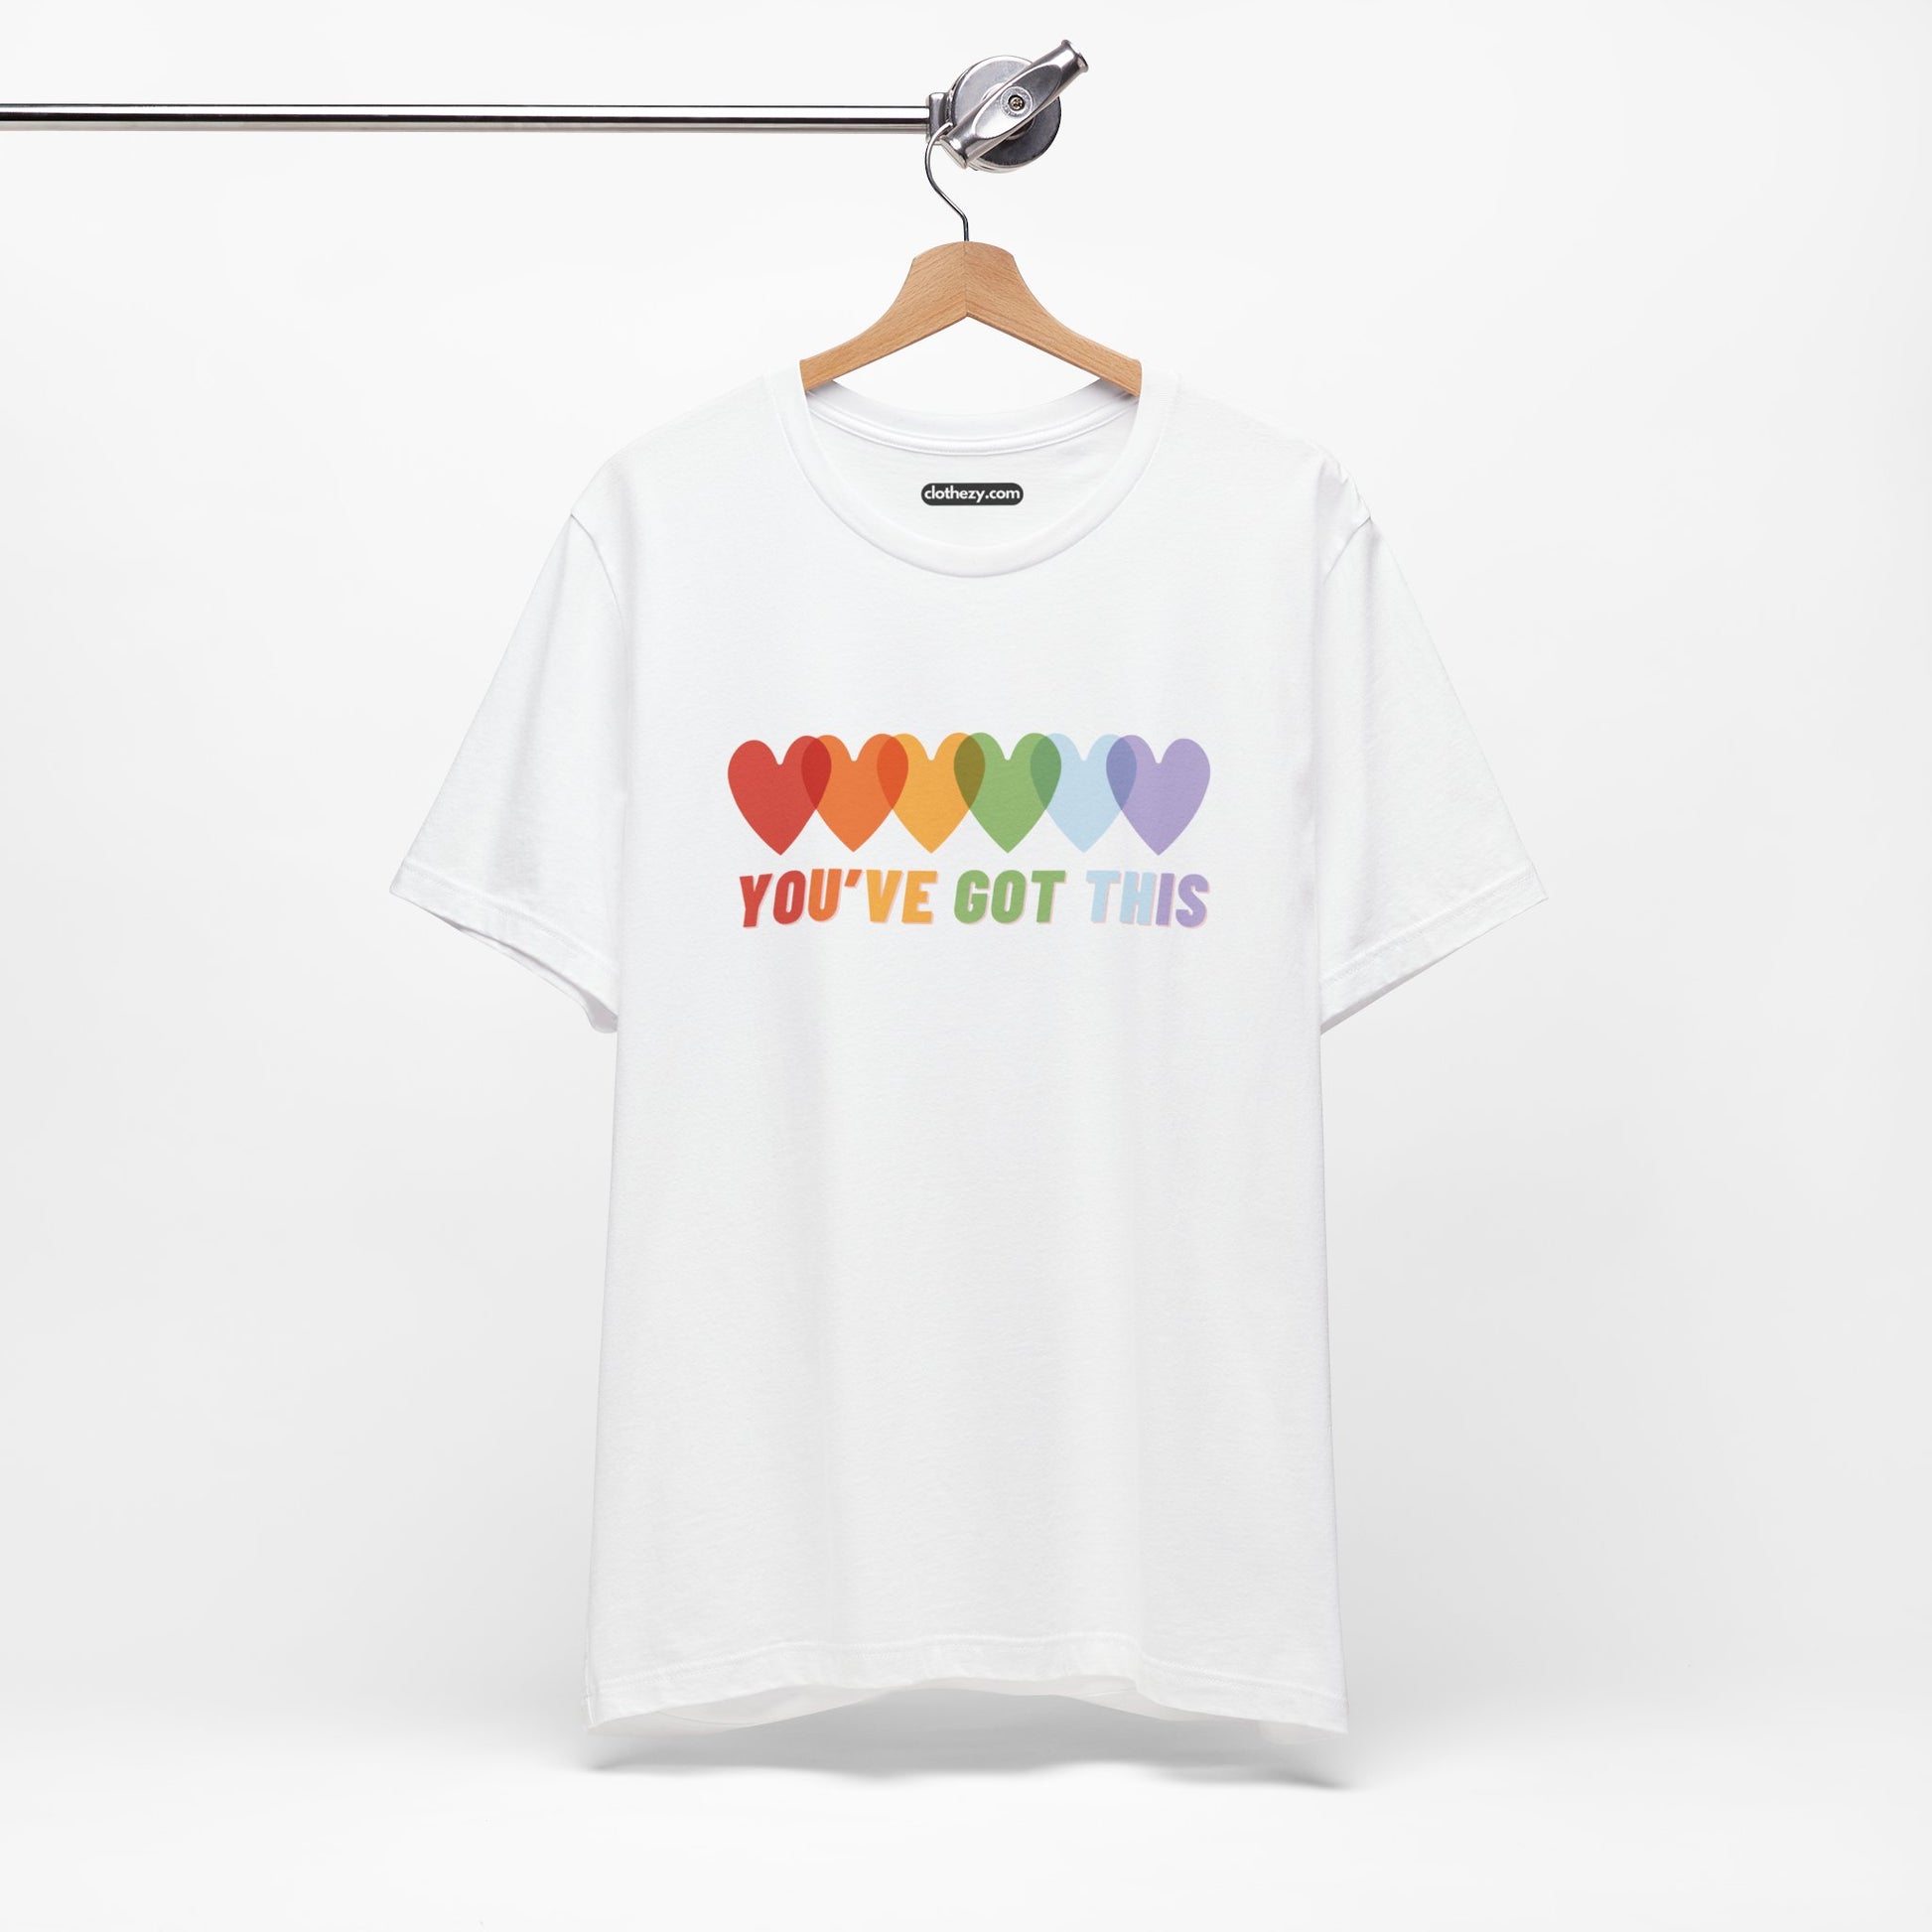 You've Got This with Hearts - Soft Cotton Adult Unisex T-Shirt, Gift for friends and family, Gift for friends and family by clothezy.com - Buy Now